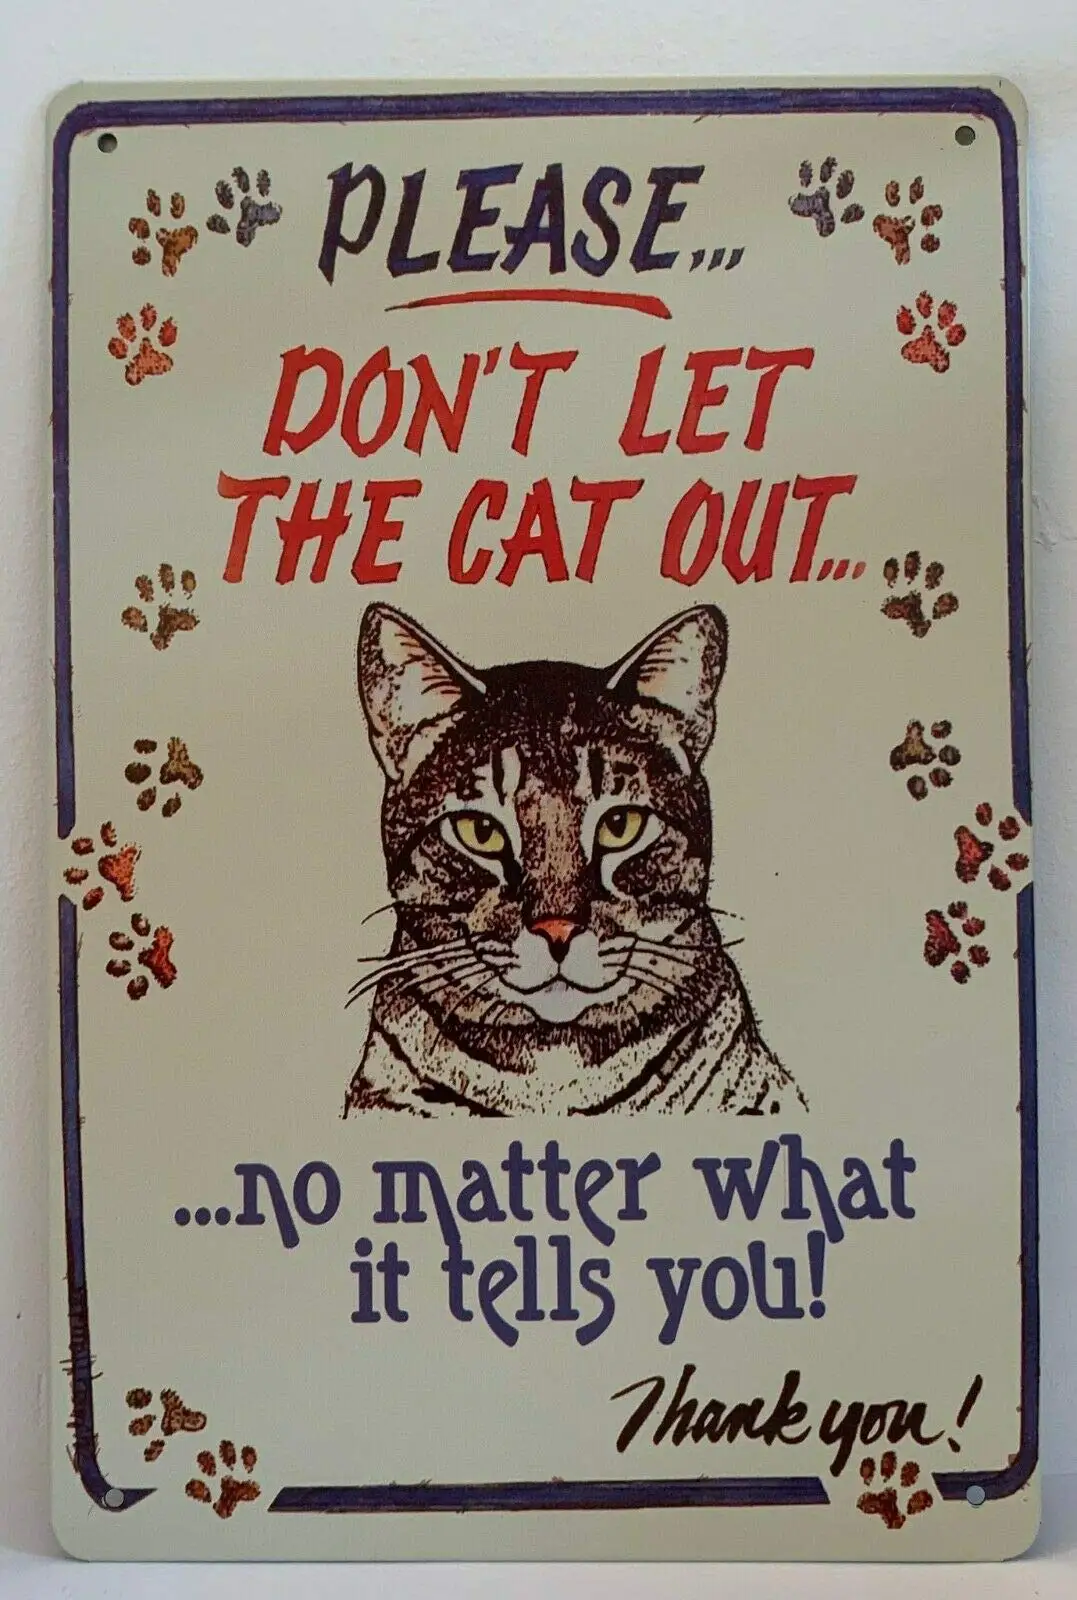 

Tin Sign Dont Let The Cat Out Funny Quotes Sayings Retro Metal Signs Plaques Retro Wall Home Bar Pub Vintage Cafe Decor, 8x12 In